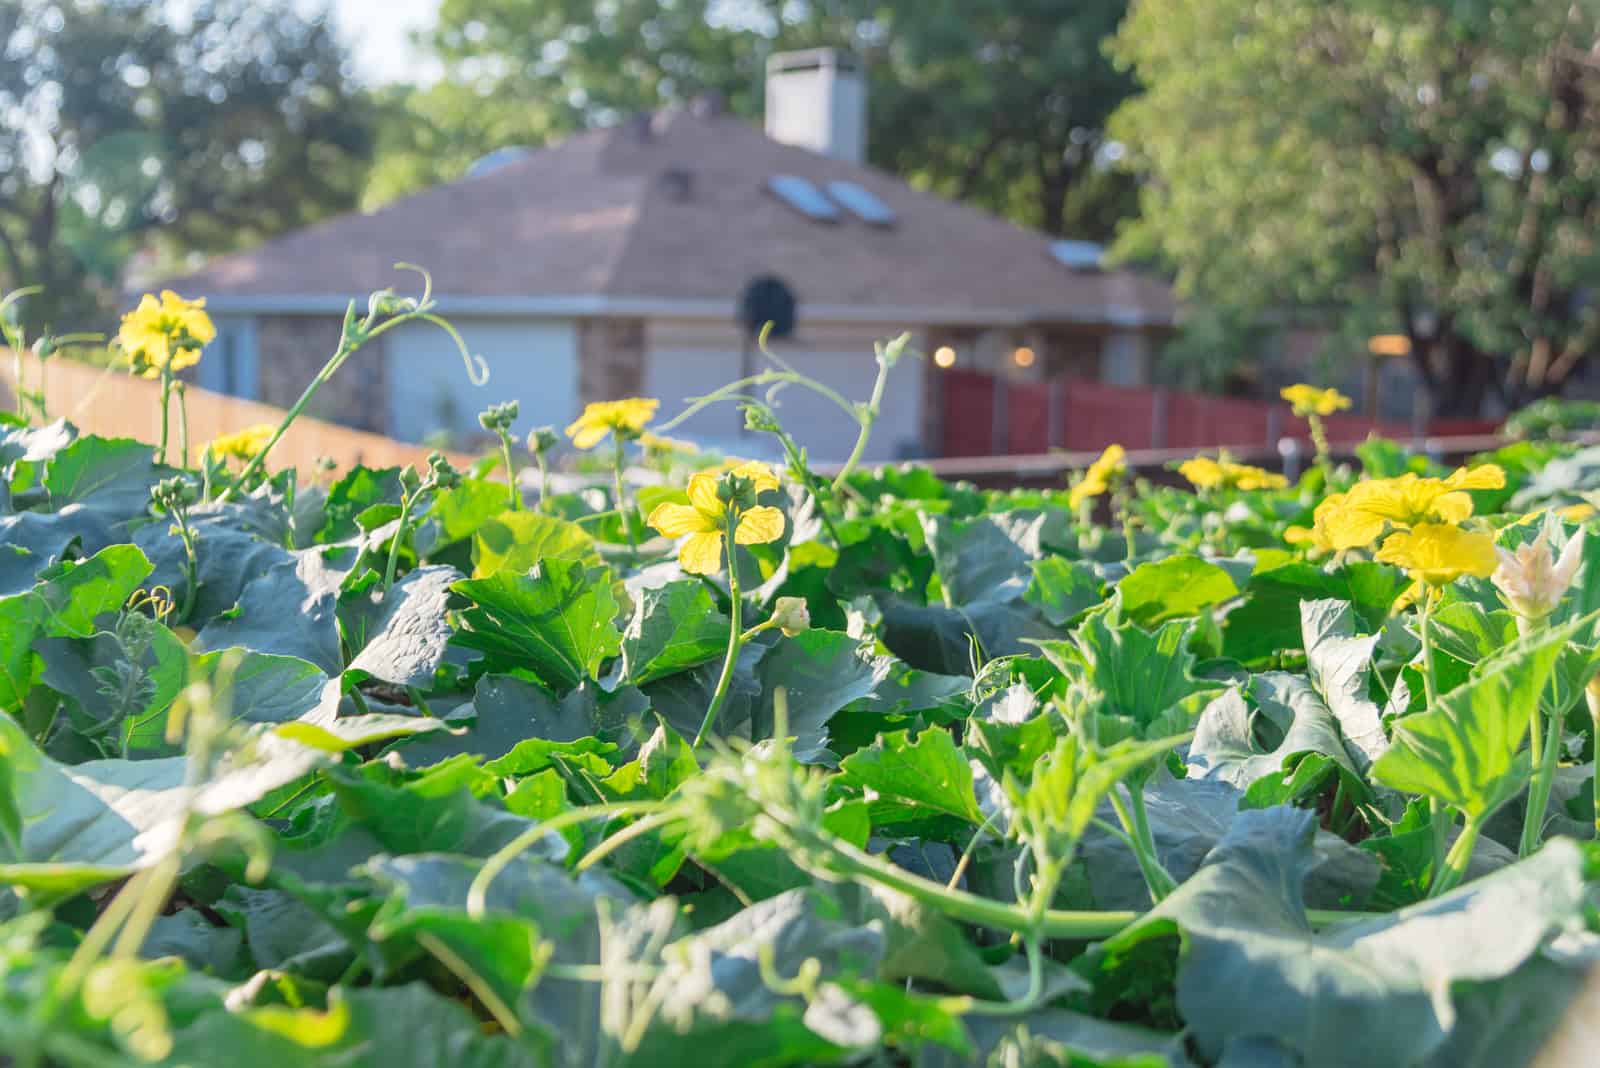 close-up-blossom-luffa-plant-growing-growing-on-pergola-with-single-family-house-in-background-near-dallas-texas-america.